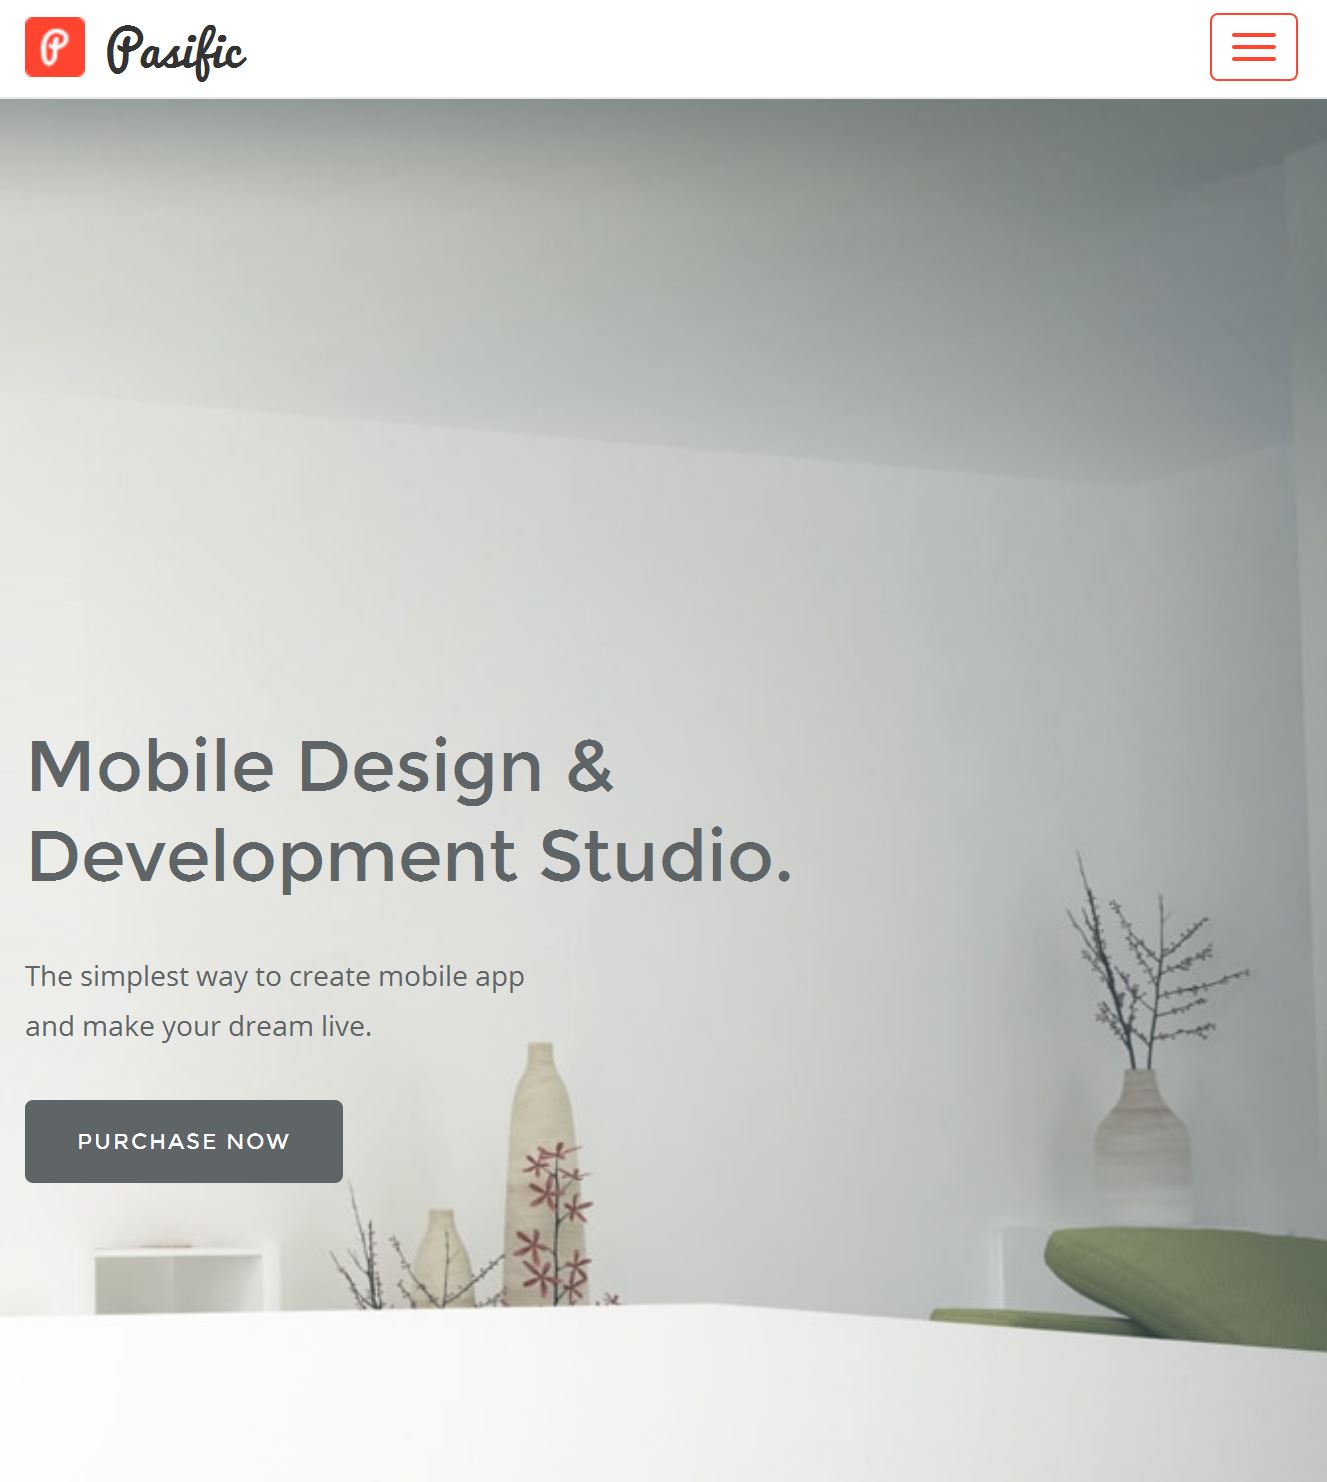 Bootstrap Responsive Template Free Download